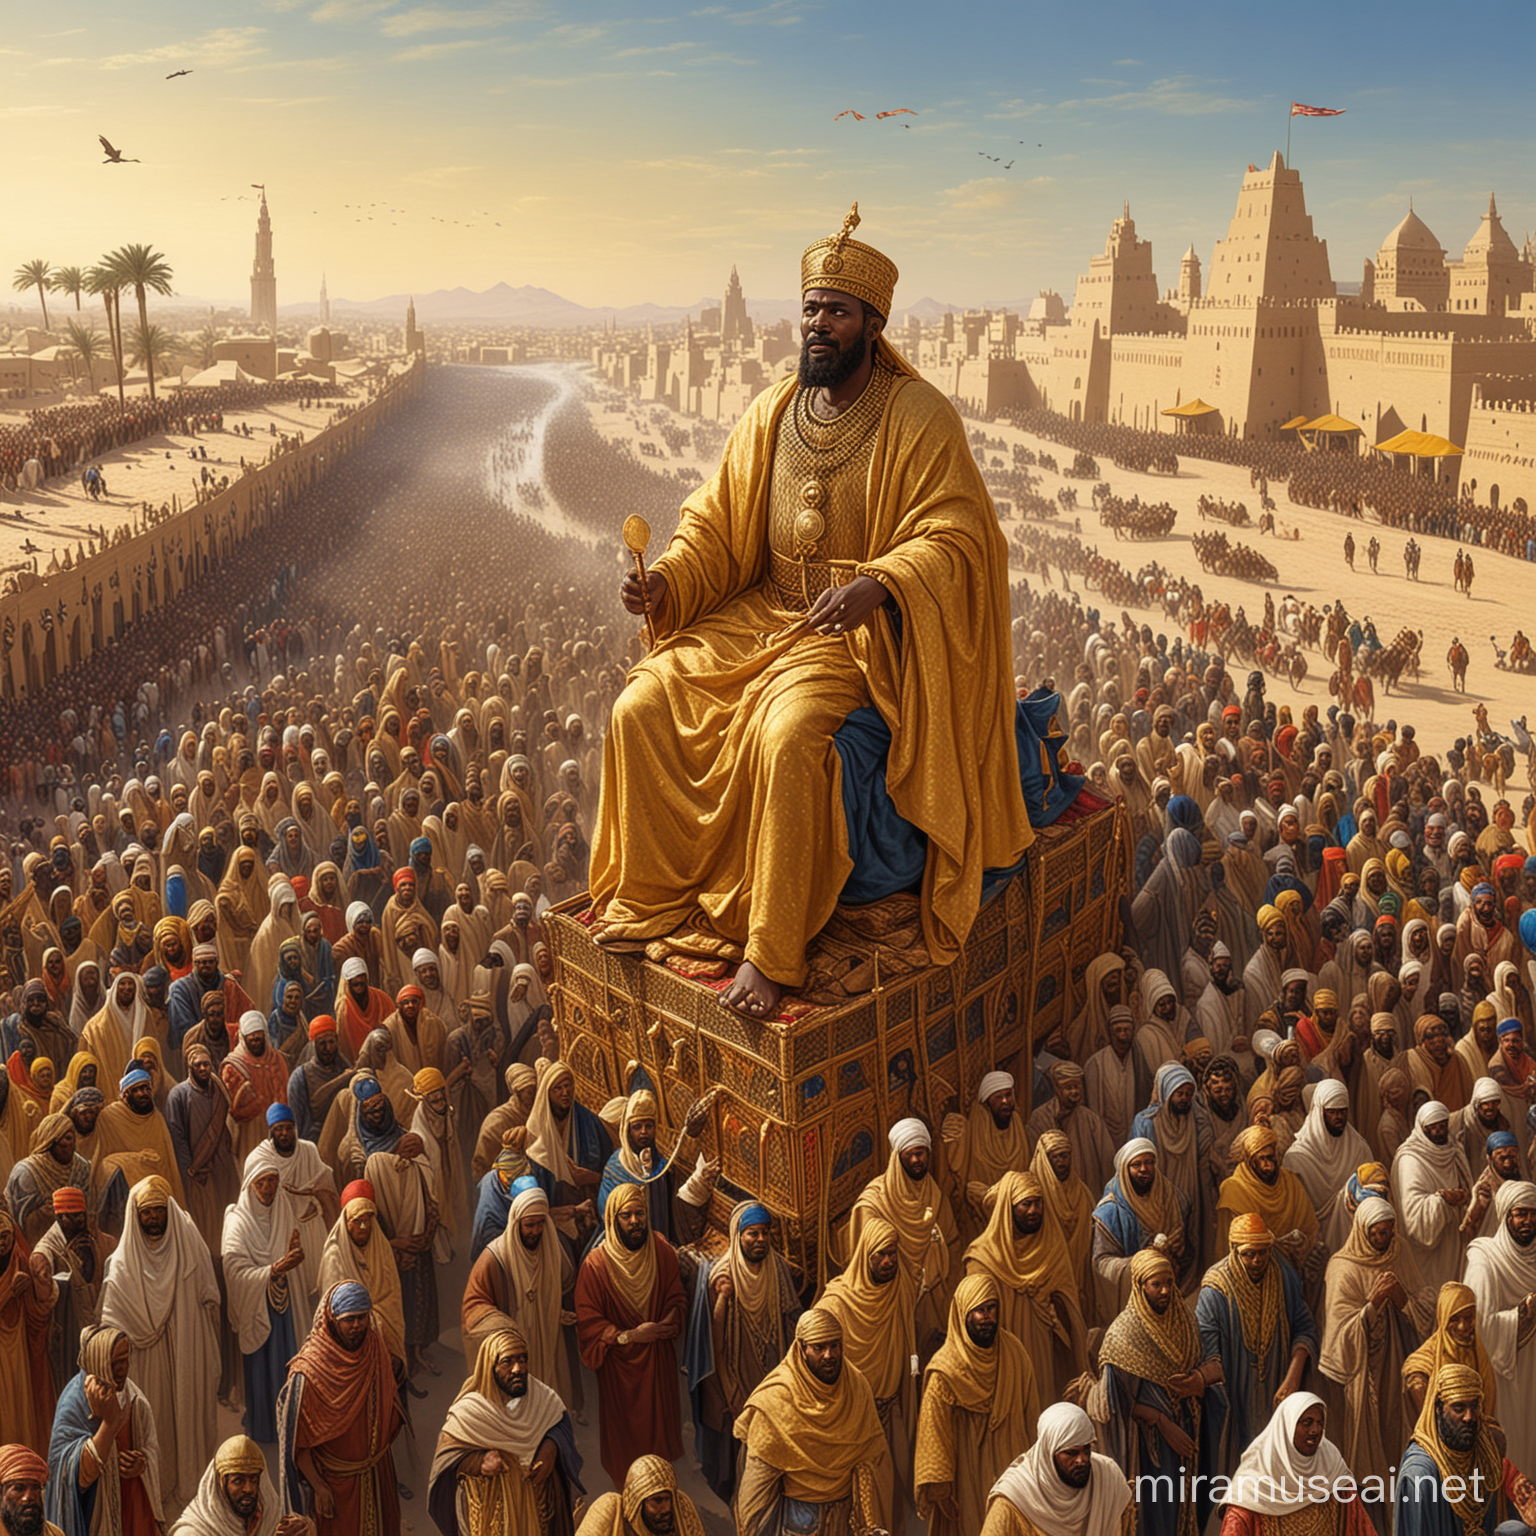 Mansa Musa traveling to Cairo with a huge caravan/procession. Show him on horseback or being carried, fabulously dressed, throwing handfuls of gold coins to poor people lining the streets, causing economic chaos.